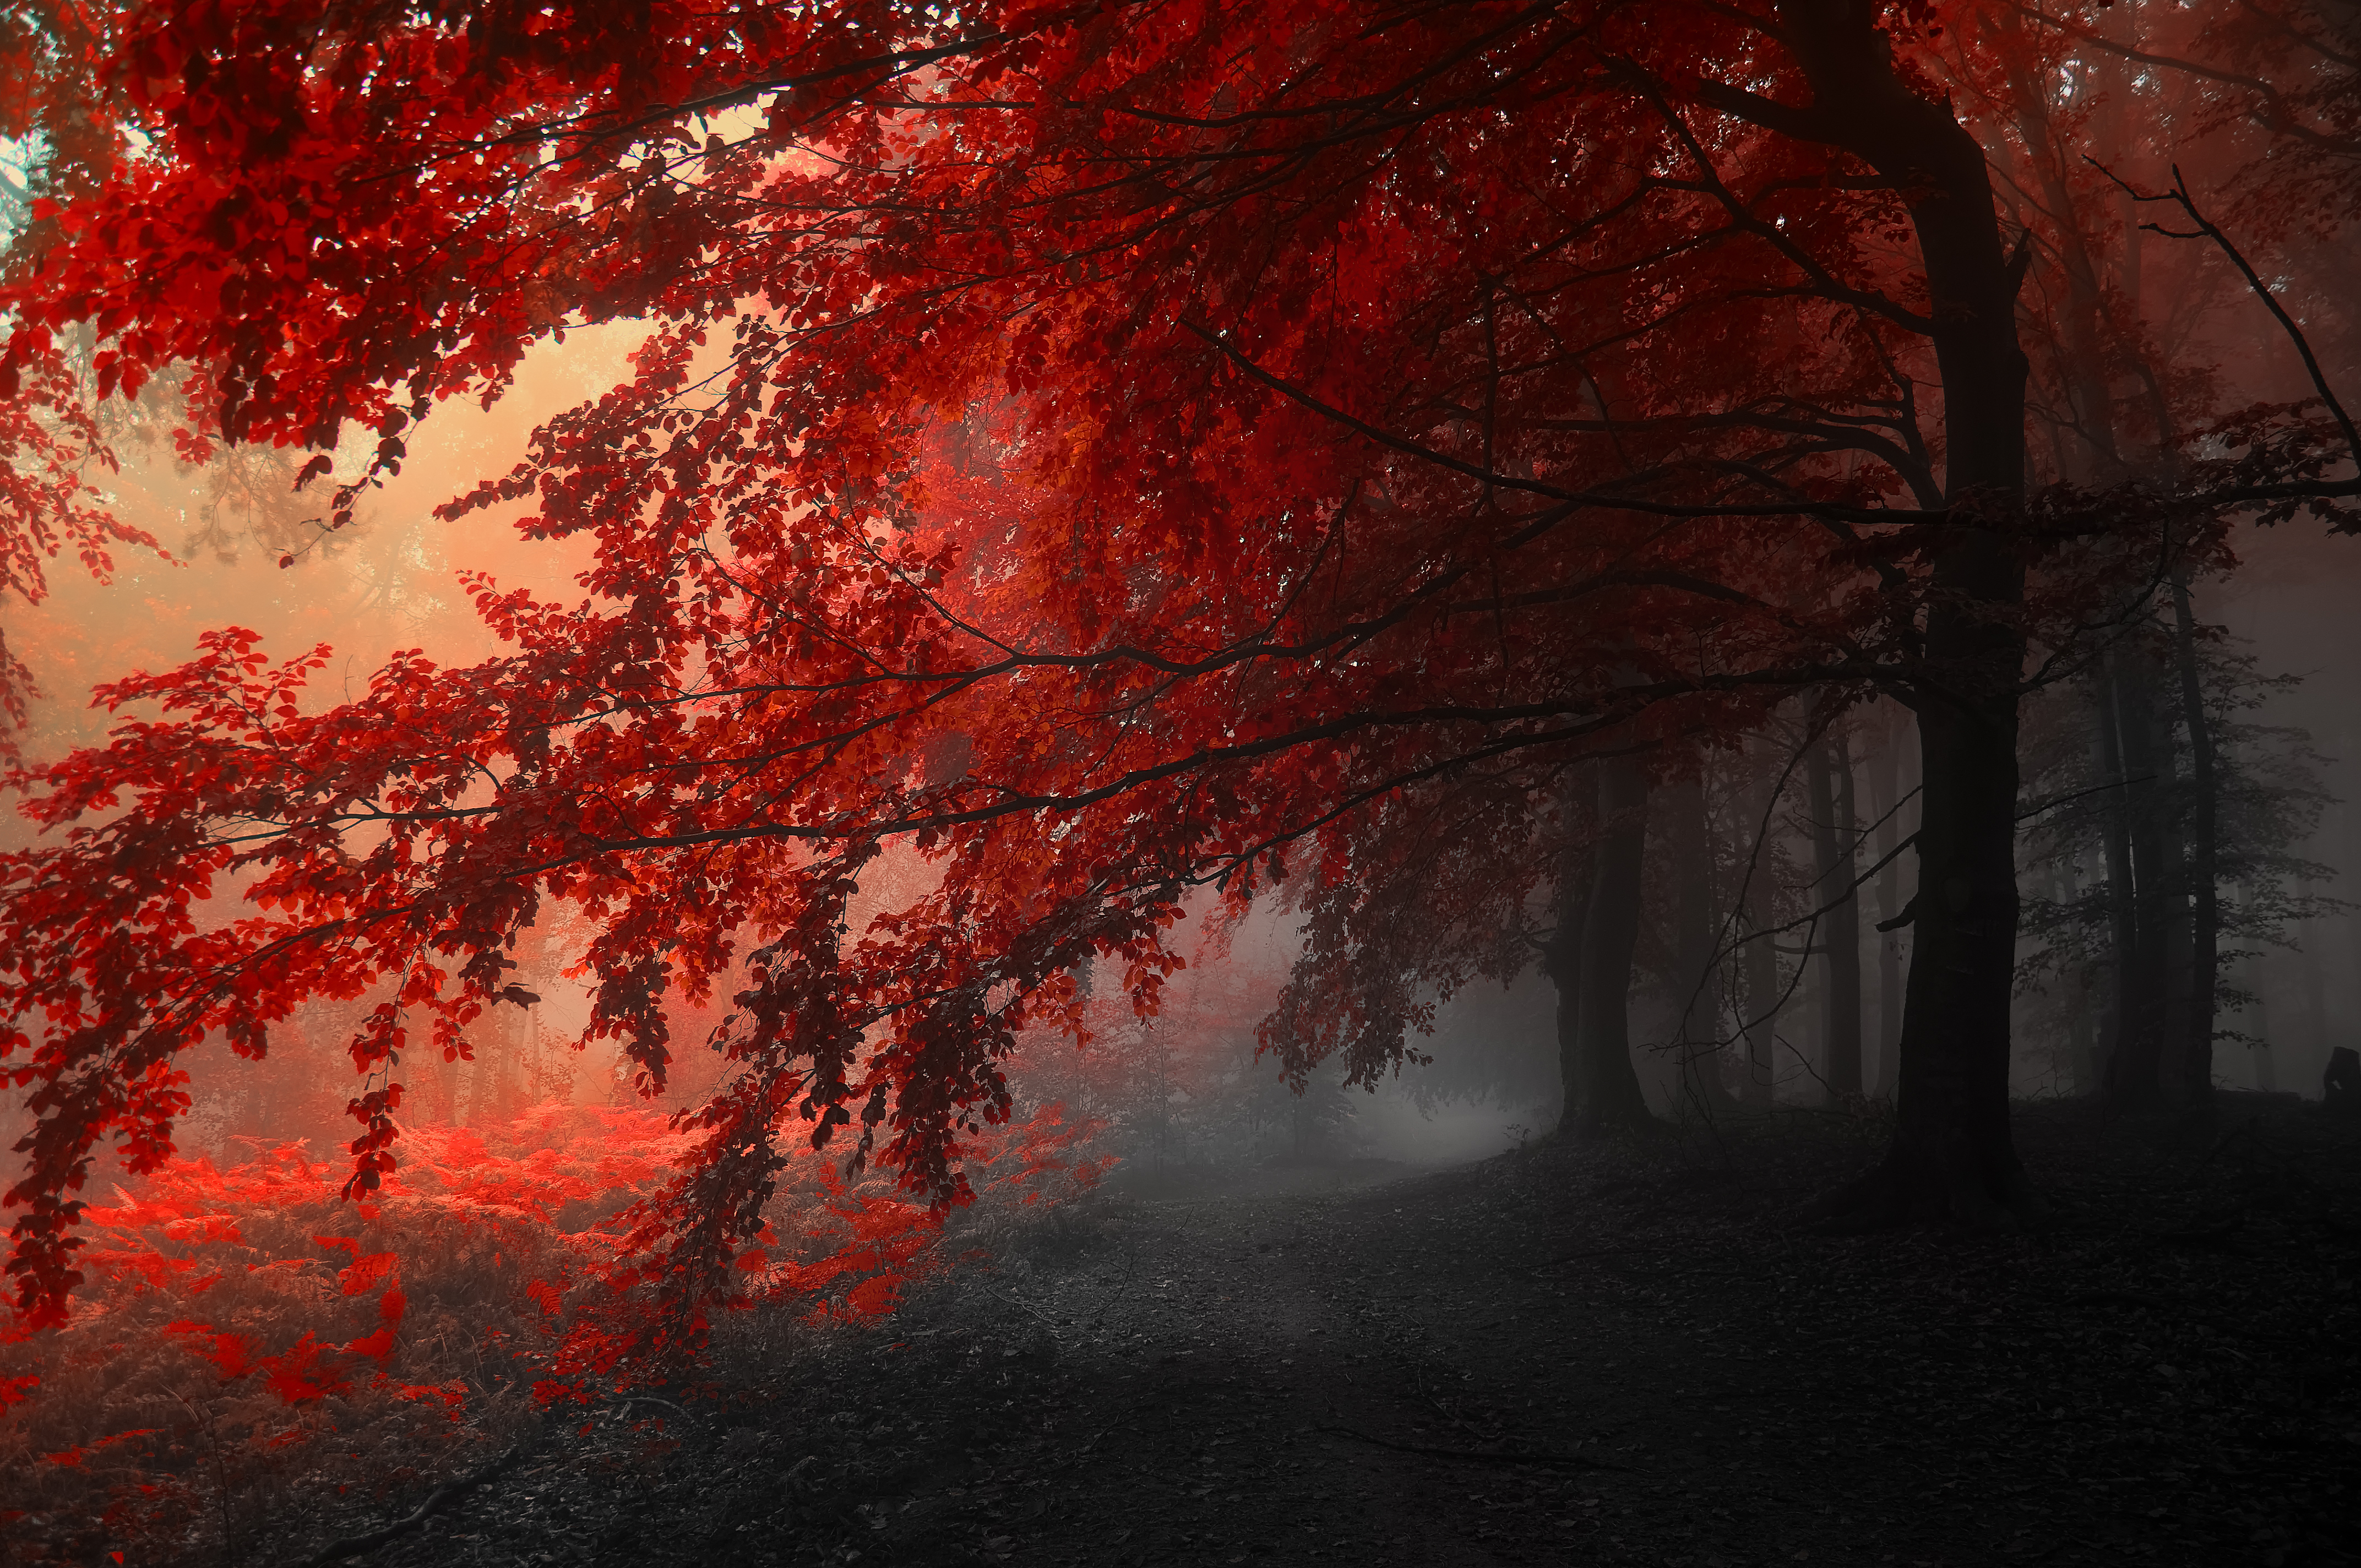 4K wallpaper   Nature   trees autumn red gray   4288x2848 4288x2848